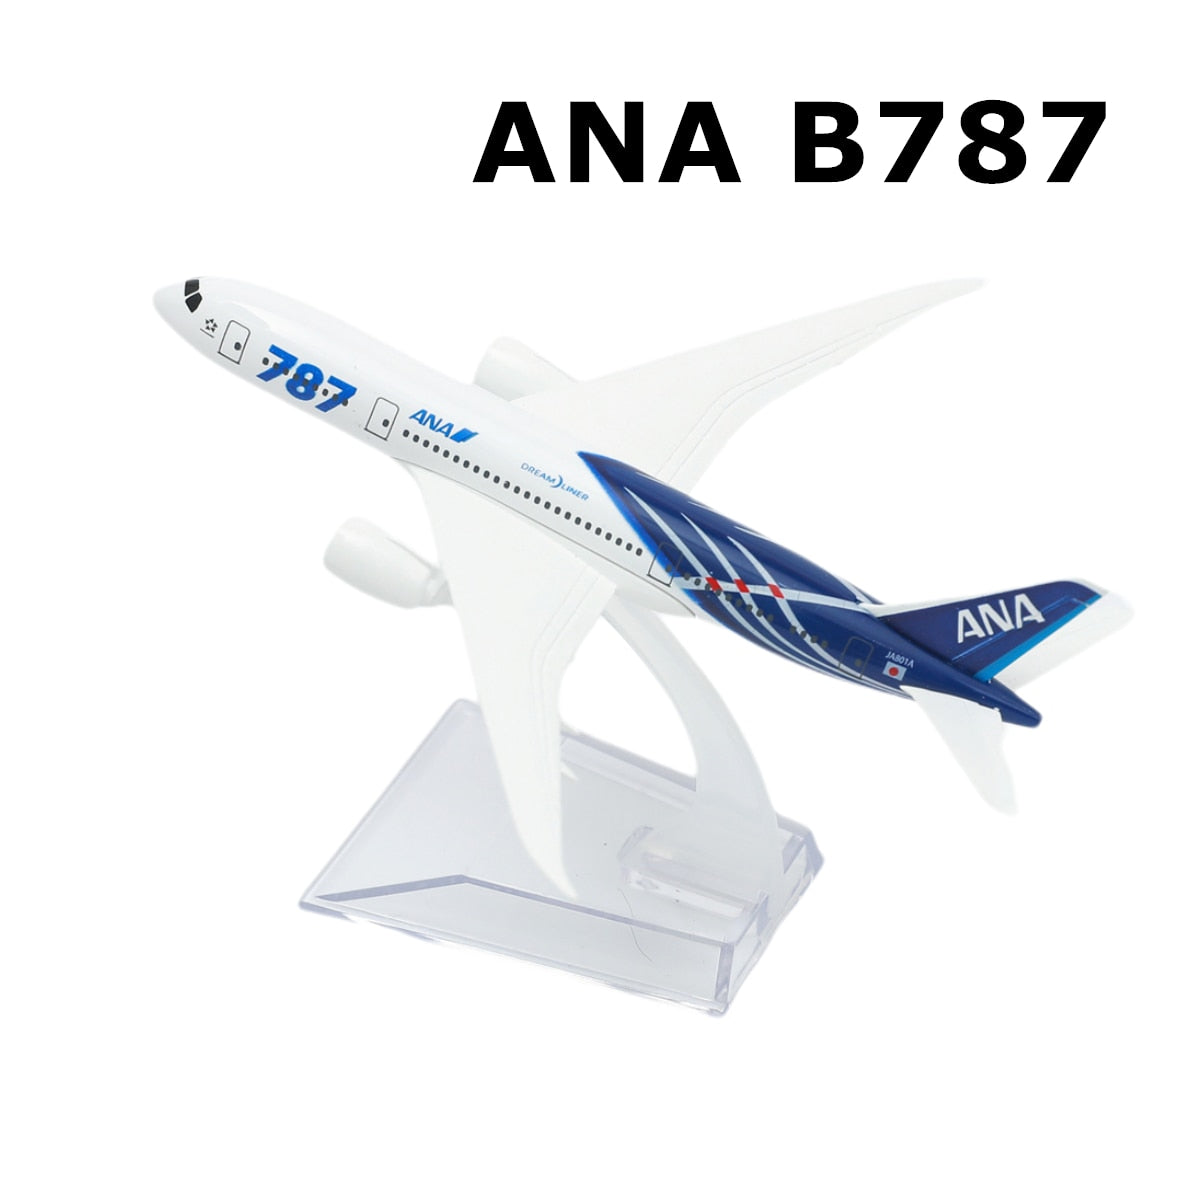 Scale 1:400 Metal Aviation Replica Airlines Plane Boeing Airbus Aircraft Model Diecast Airplane Miniature Kids Toys for Boys